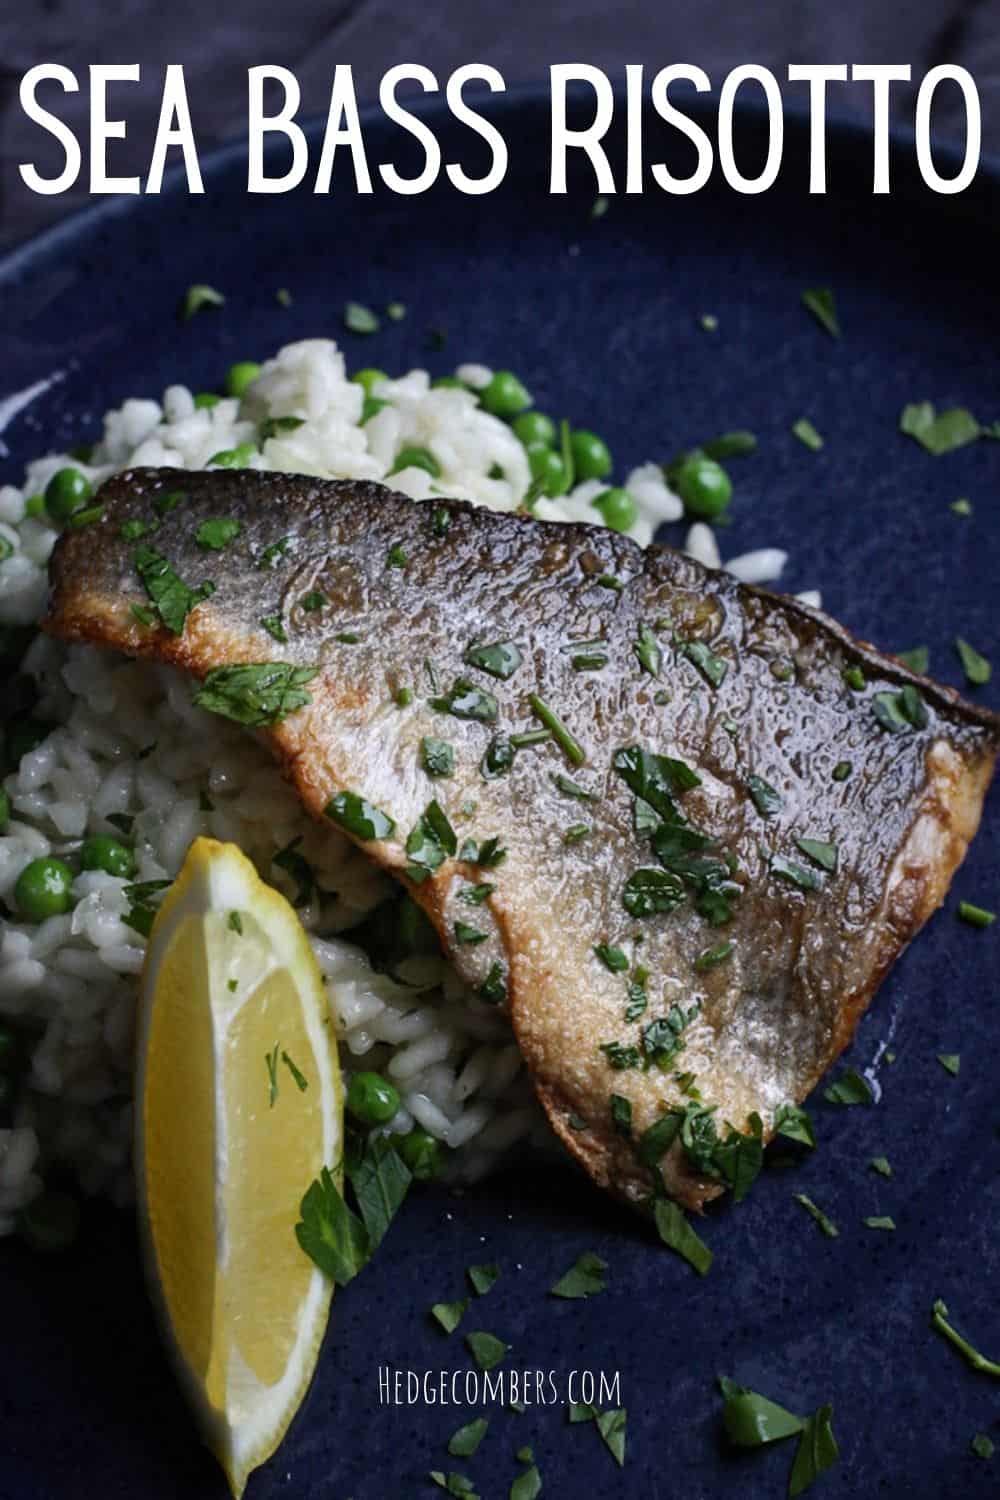 A cooked sea bass fillet on rice and peas in a frying pan